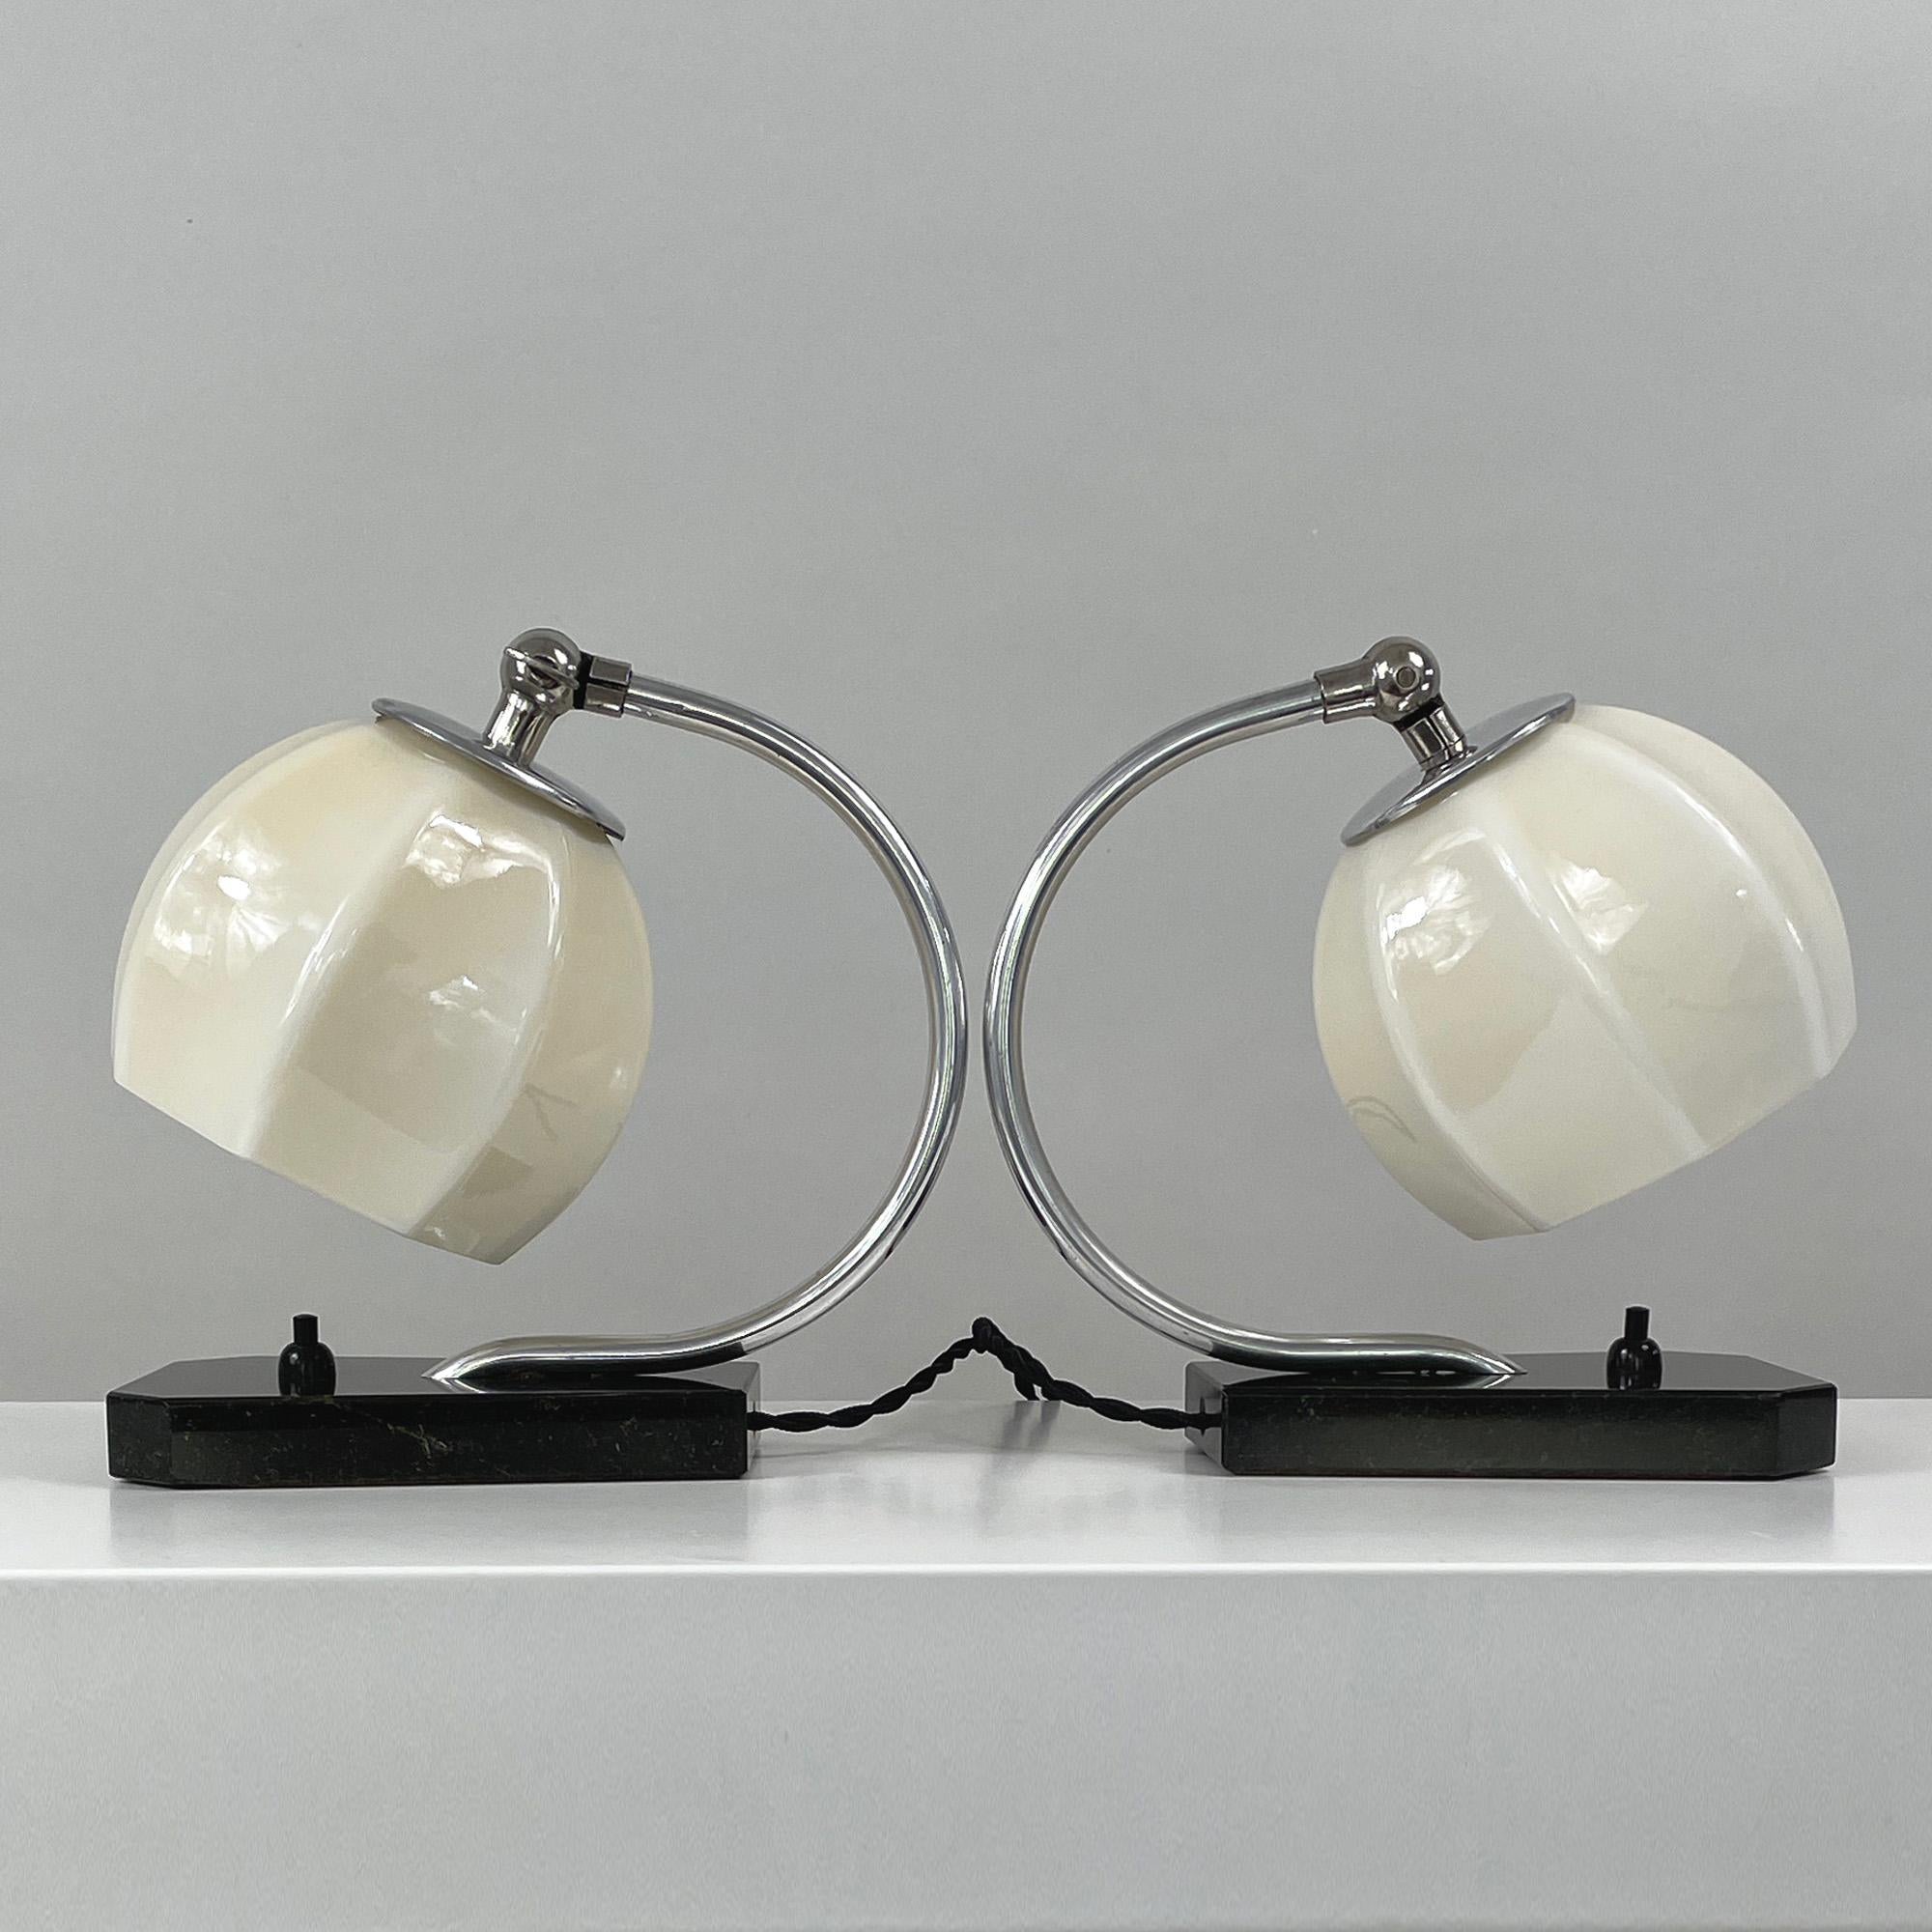 German Art Deco Opaline Glass, Marble and Aluminum Table Lamps, 1930s For Sale 6